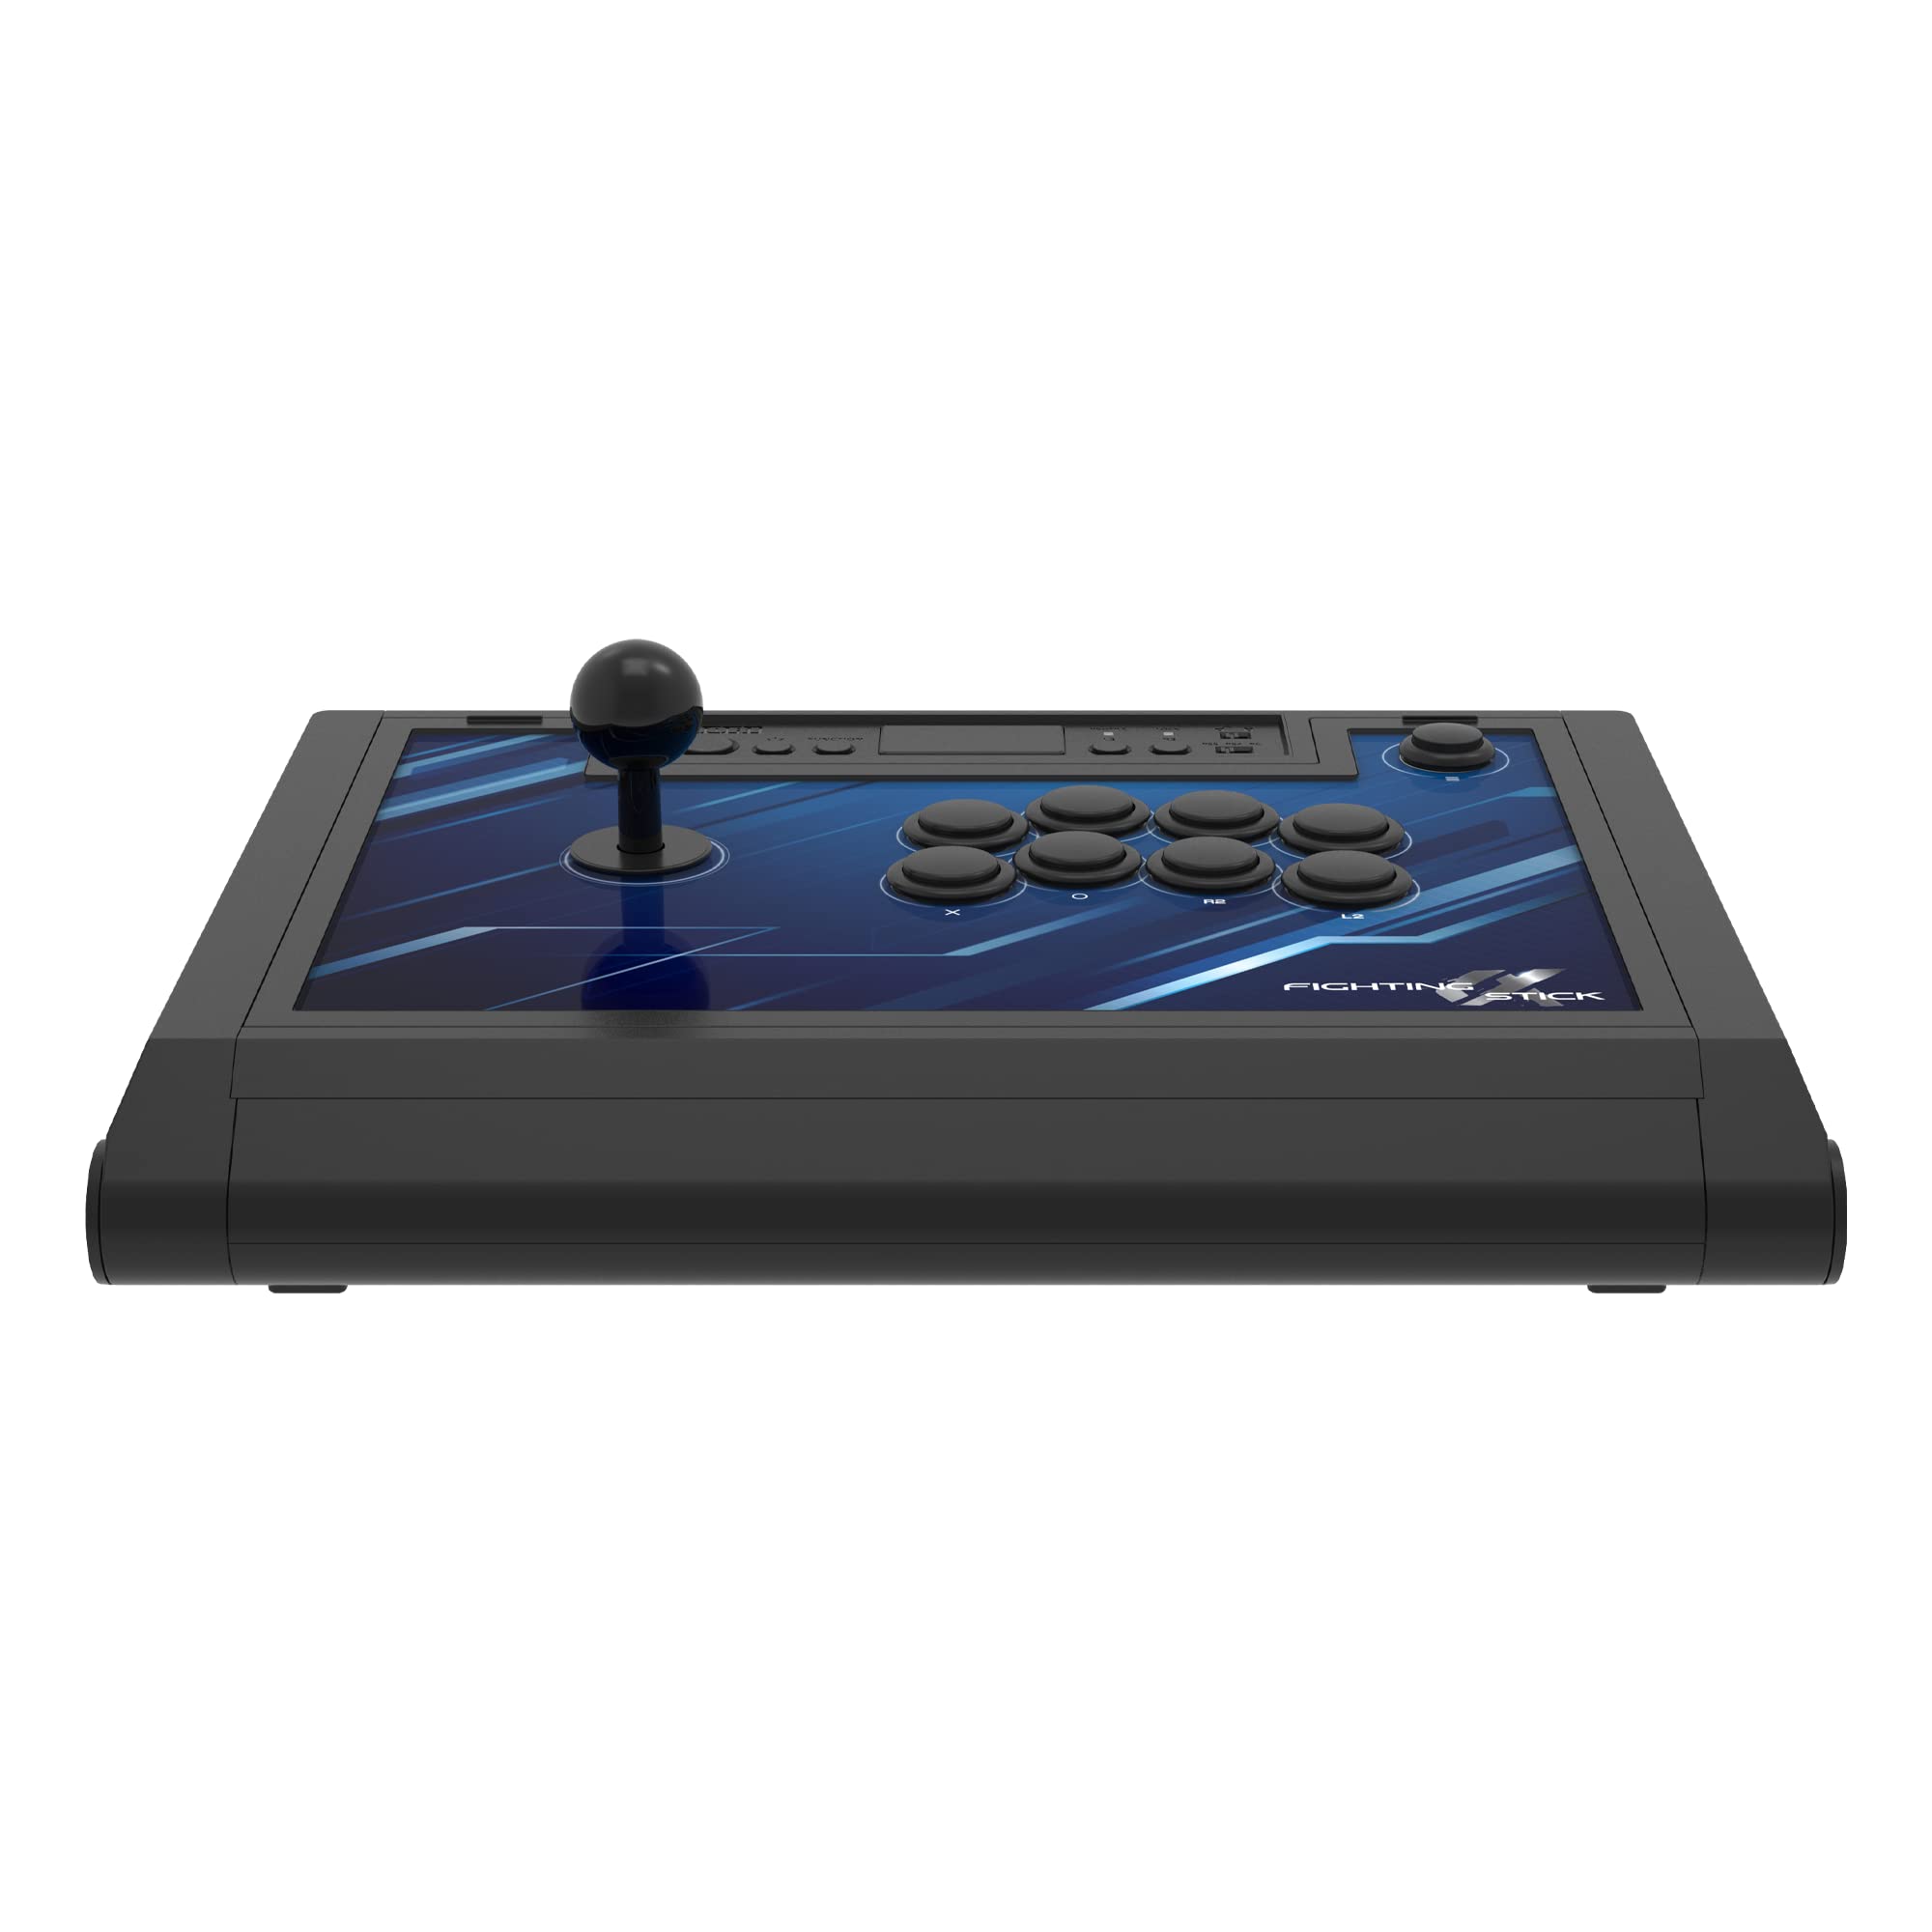 HORI PlayStation 5 Fighting Stick Alpha - Tournament Grade Fightstick for PS5, PS4, PC - Officially Licensed by Sony